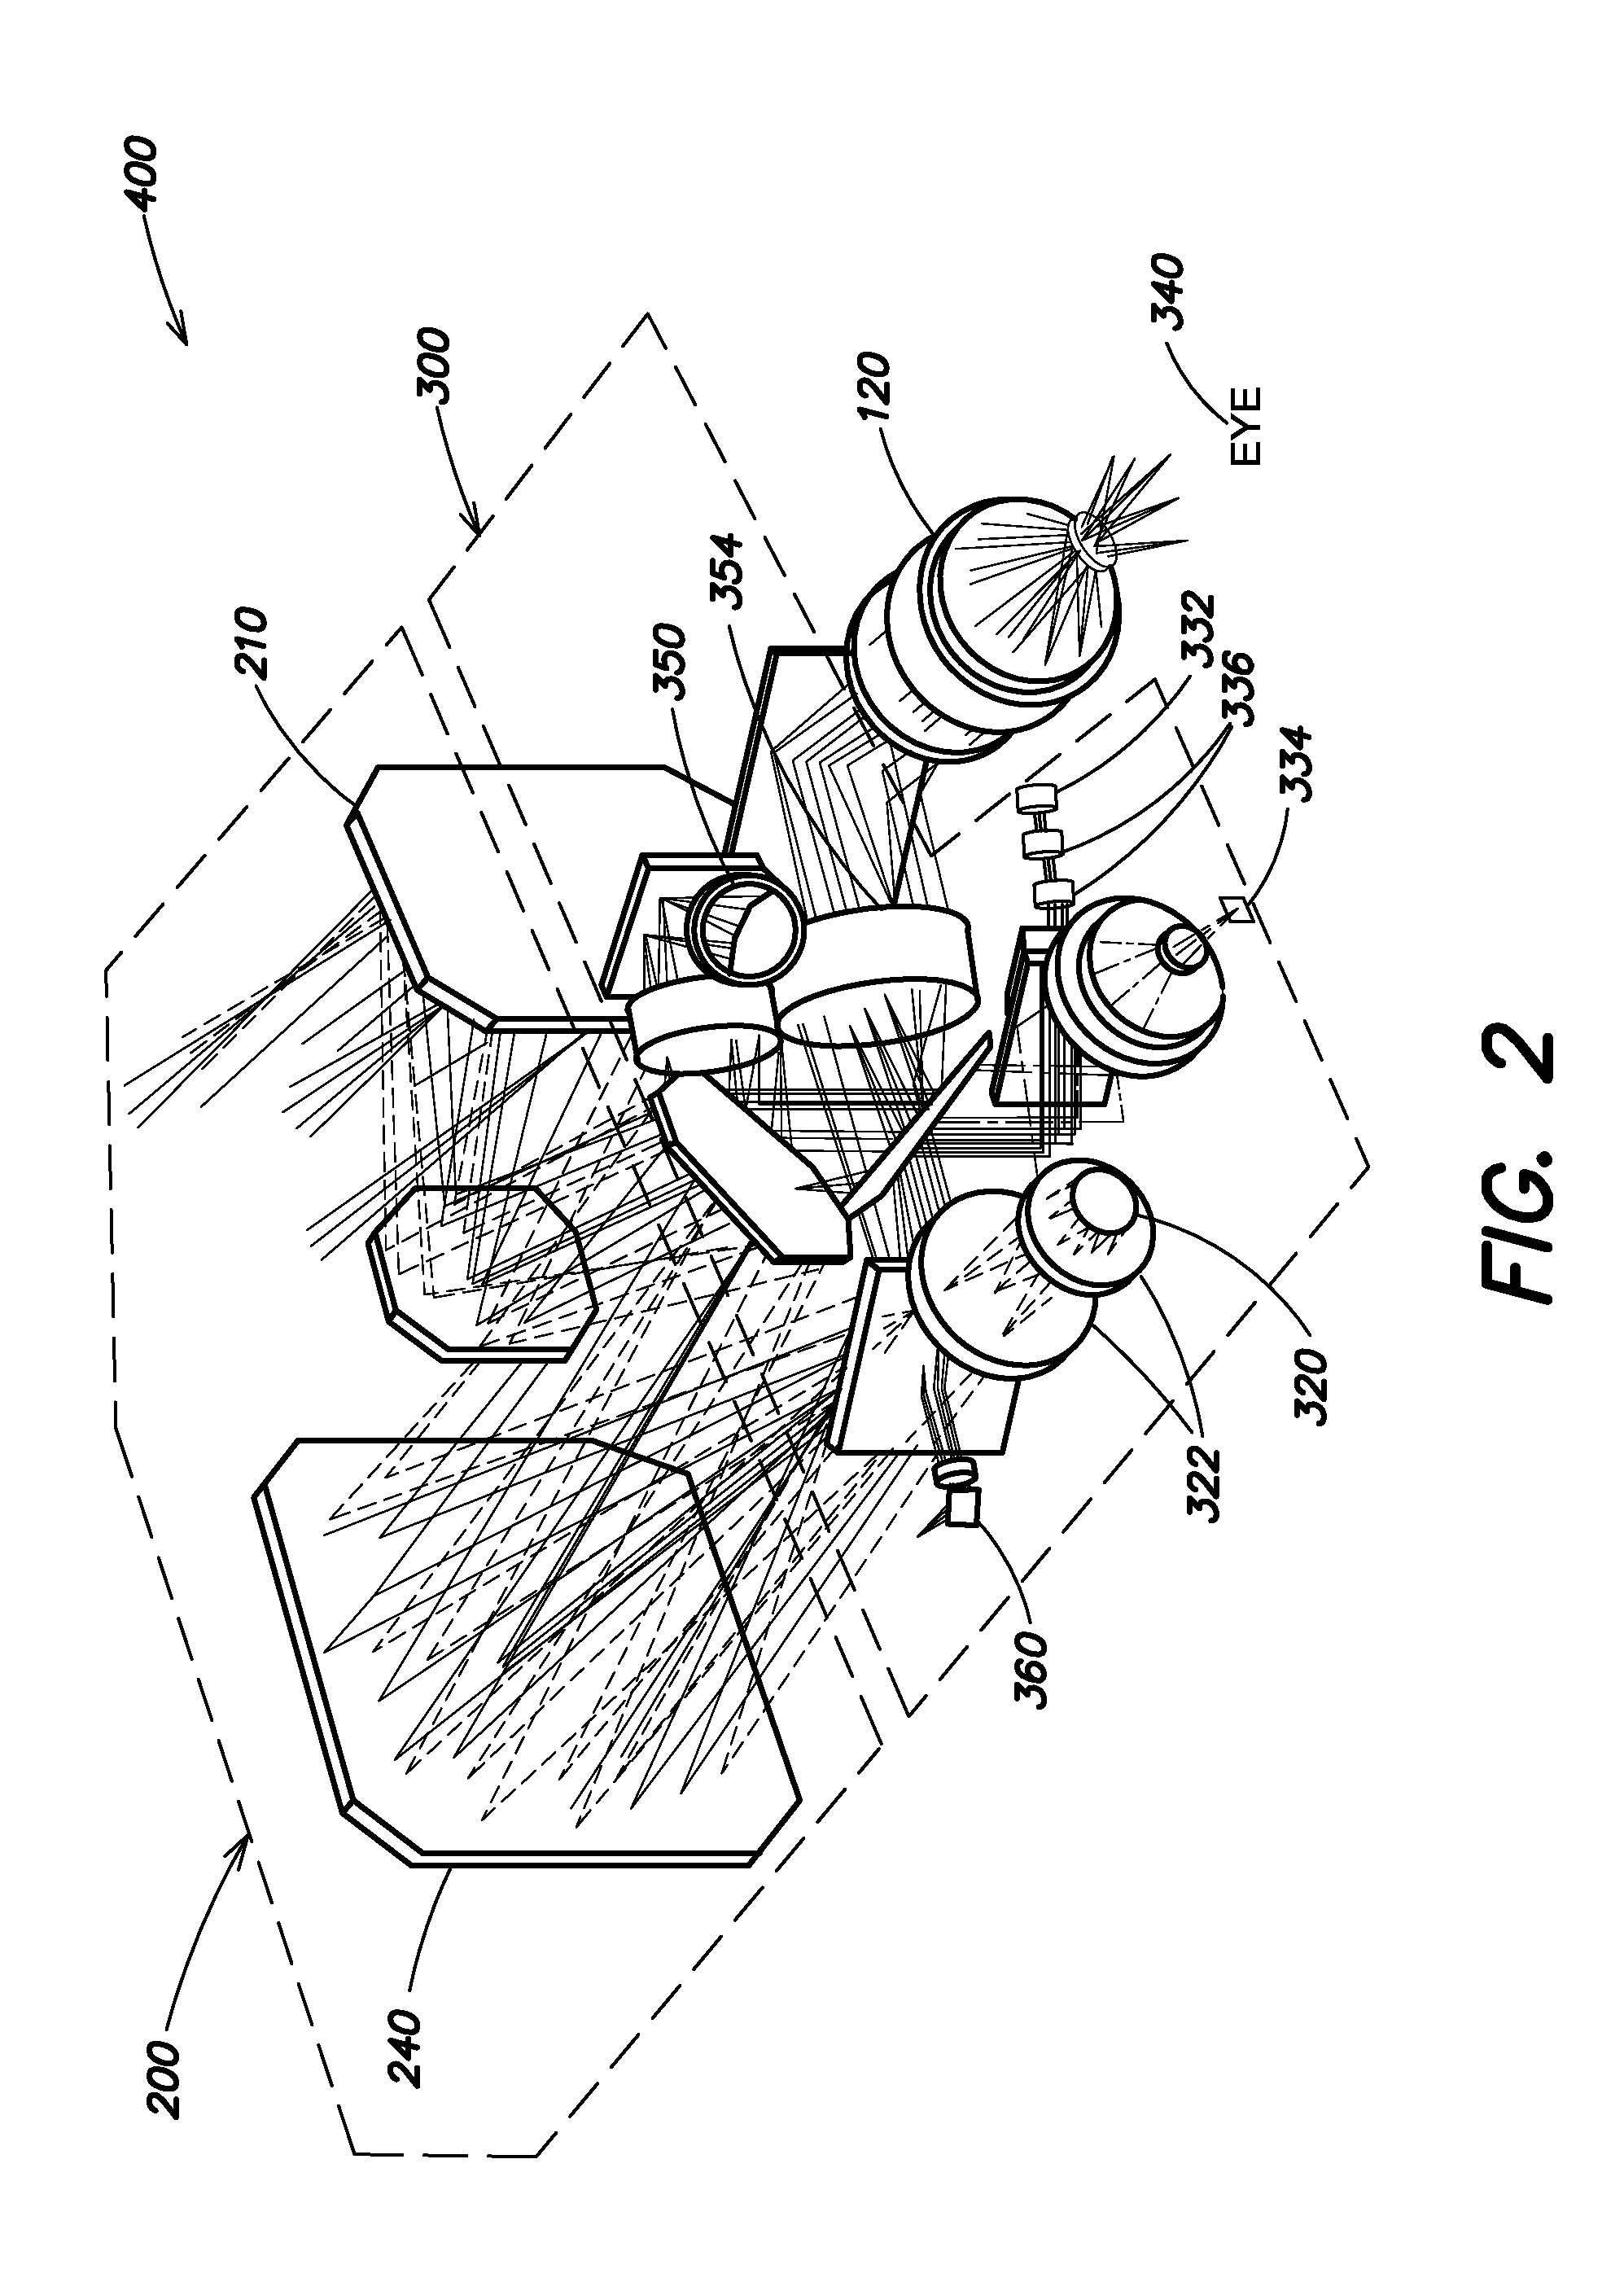 Optical configuration for a compact integrated day/night viewing and laser range finding system